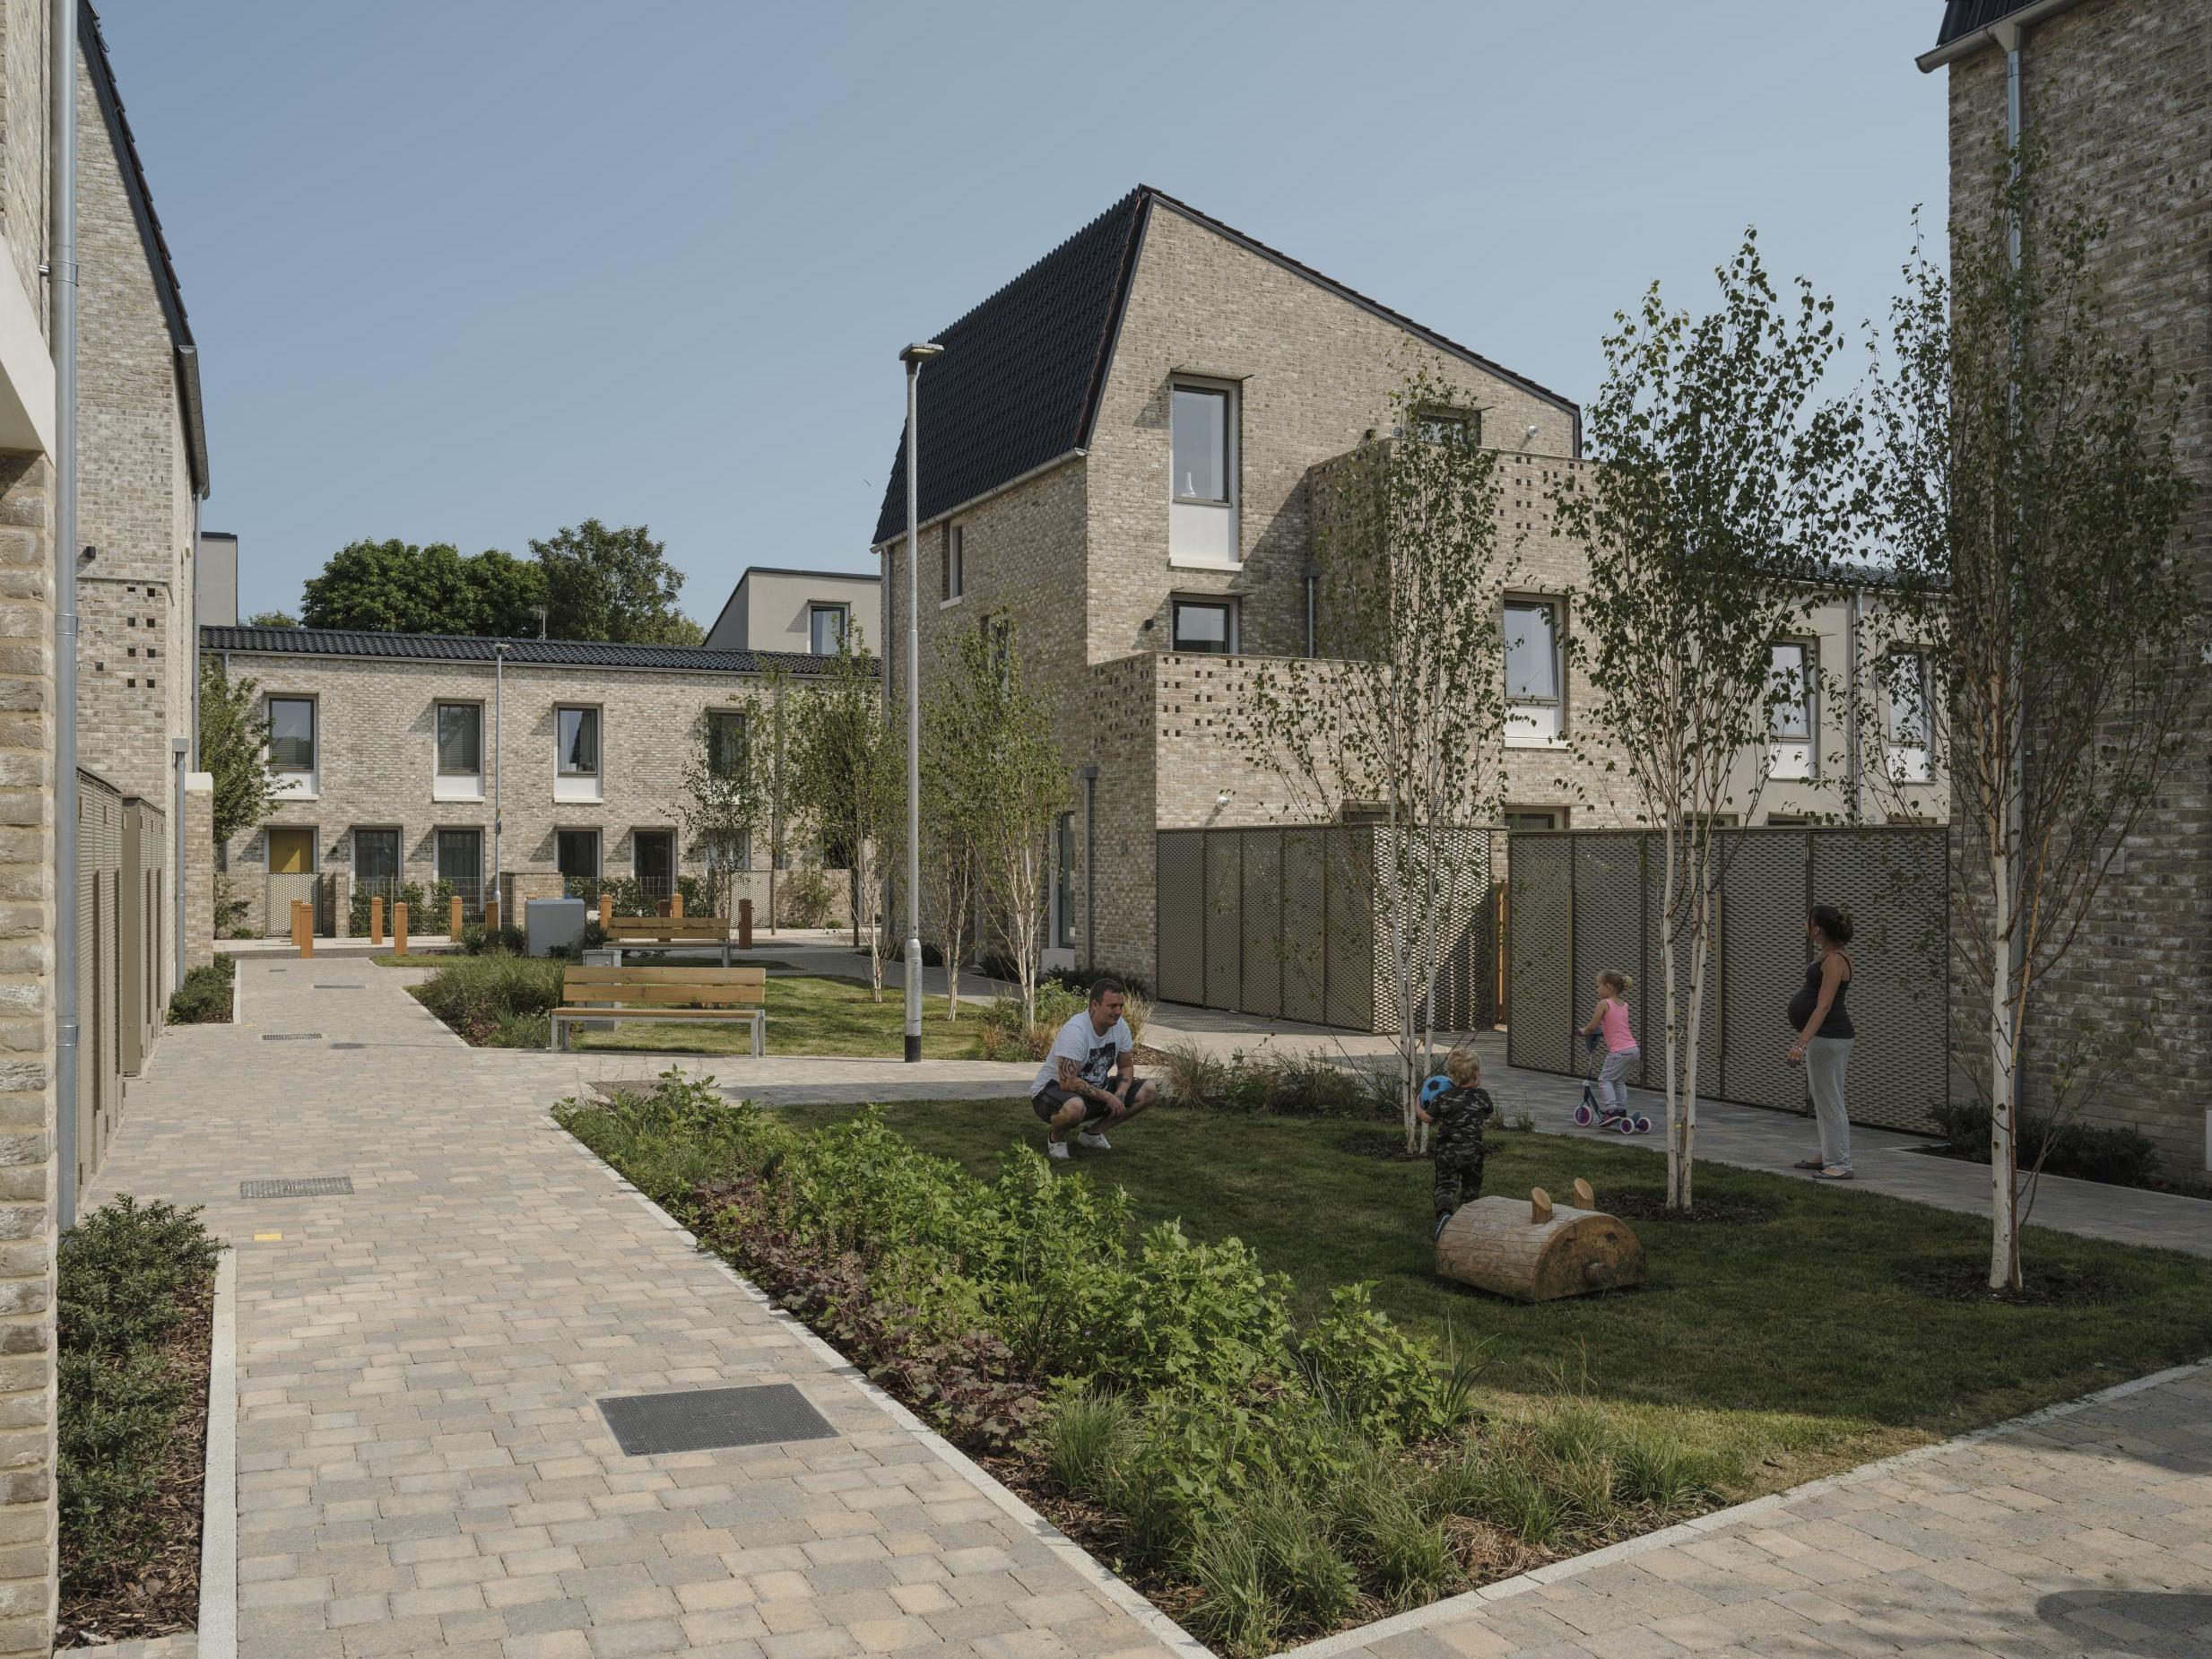 'A beacon of hope' – Norwich council estate wins this year's Riba Stirling Prize for Britain's best new building